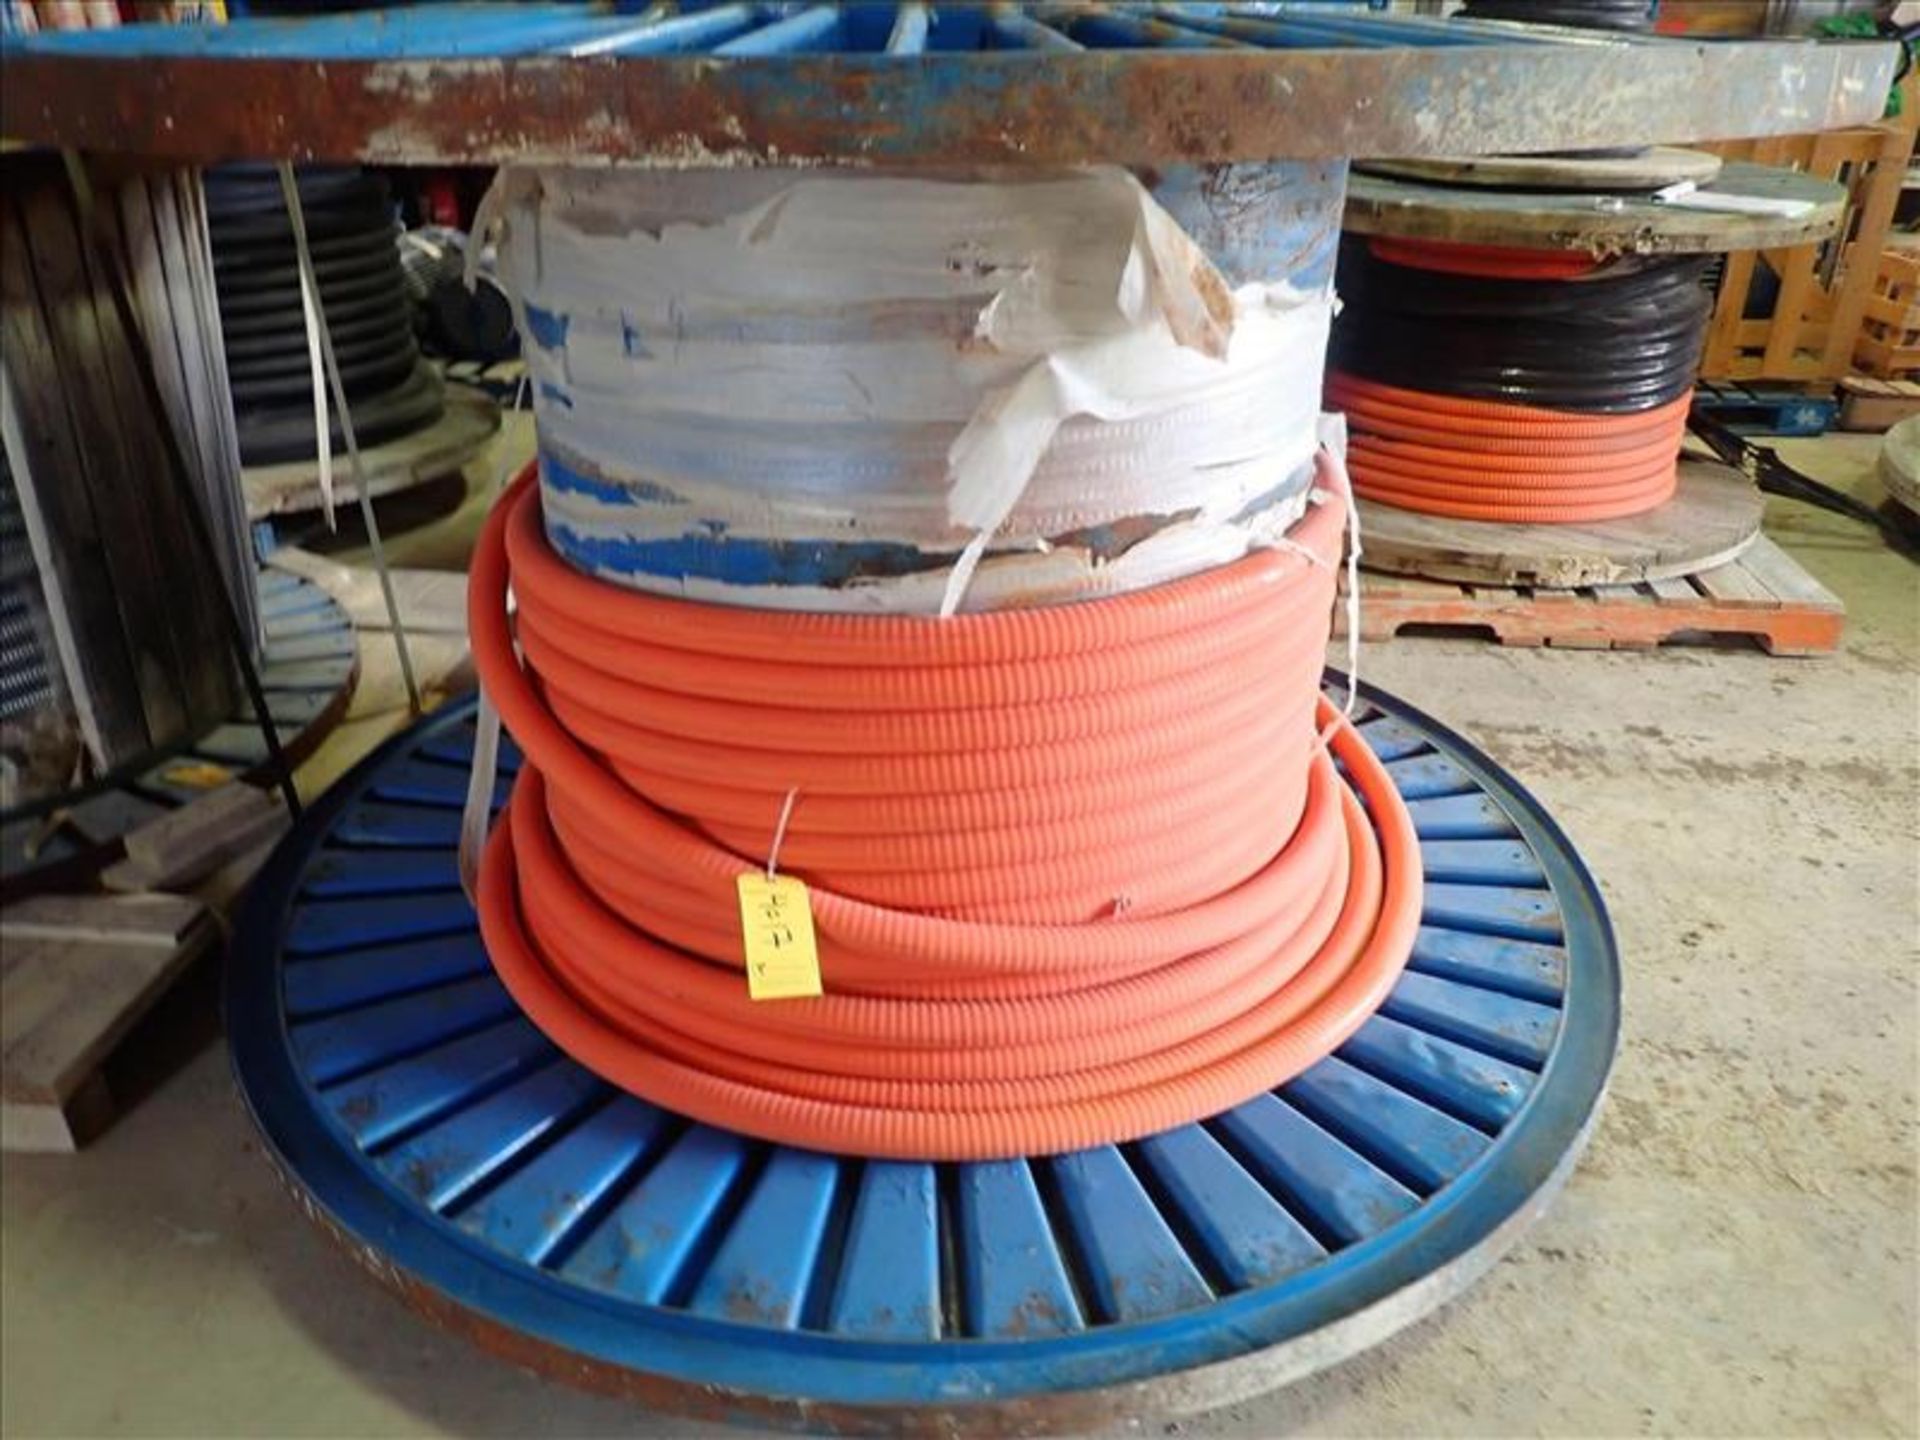 Partial Cable Reel; General Cable MI 3/C 1/0 AWC Copper CPT 2.92 MMK 115 MILS TRXLPE 5KV (1334 JNSLL